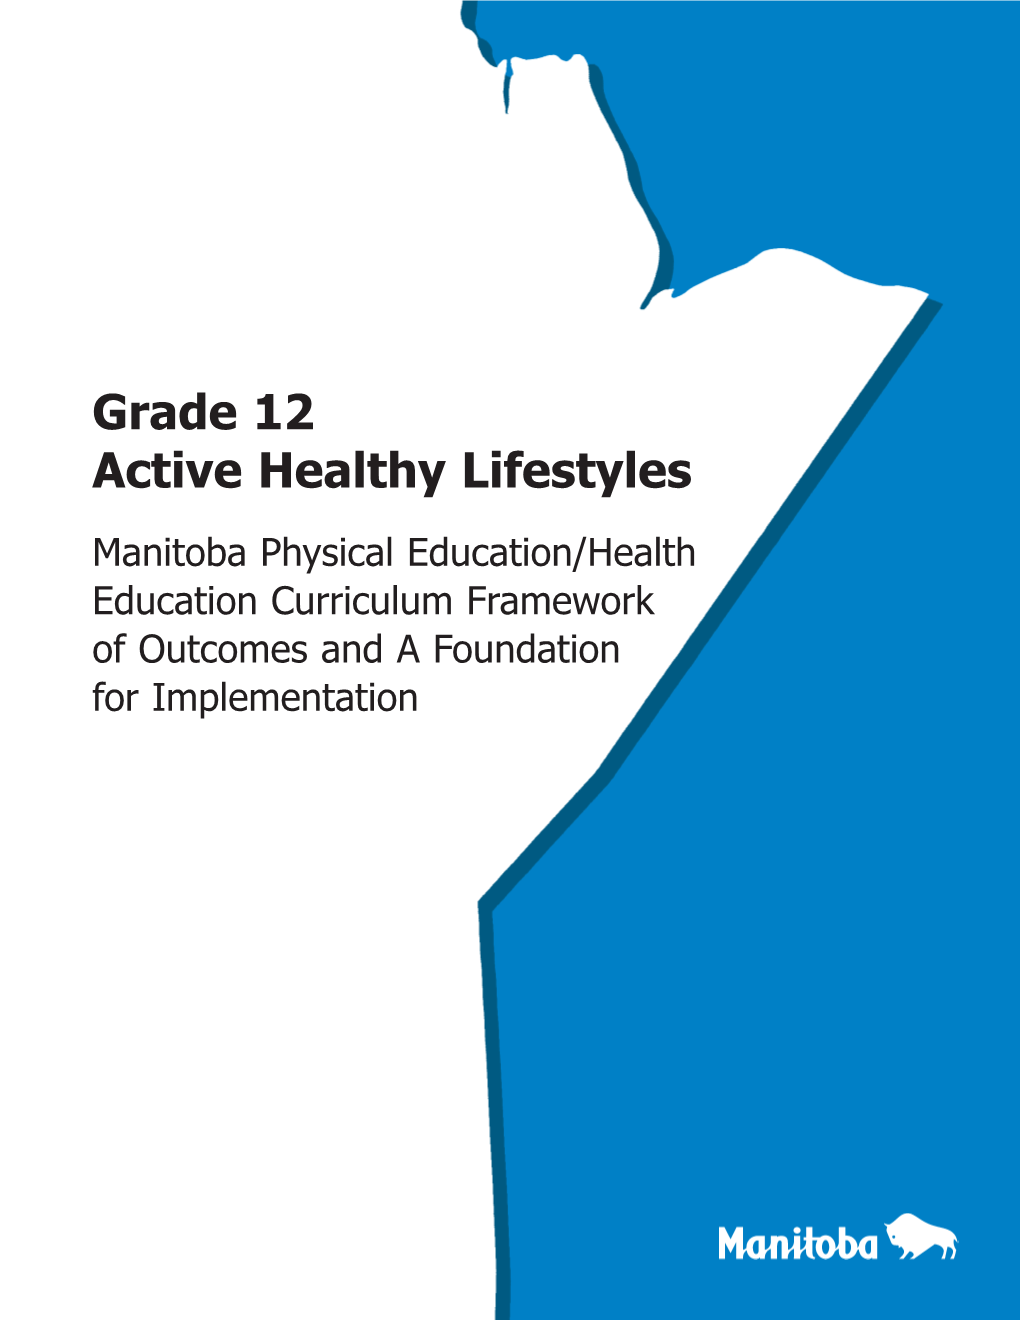 Grade 12 Active Healthy Lifestyles Manitoba Physical Education/Health Education Curriculum Framework of Outcomes and a Foundation for Implementation